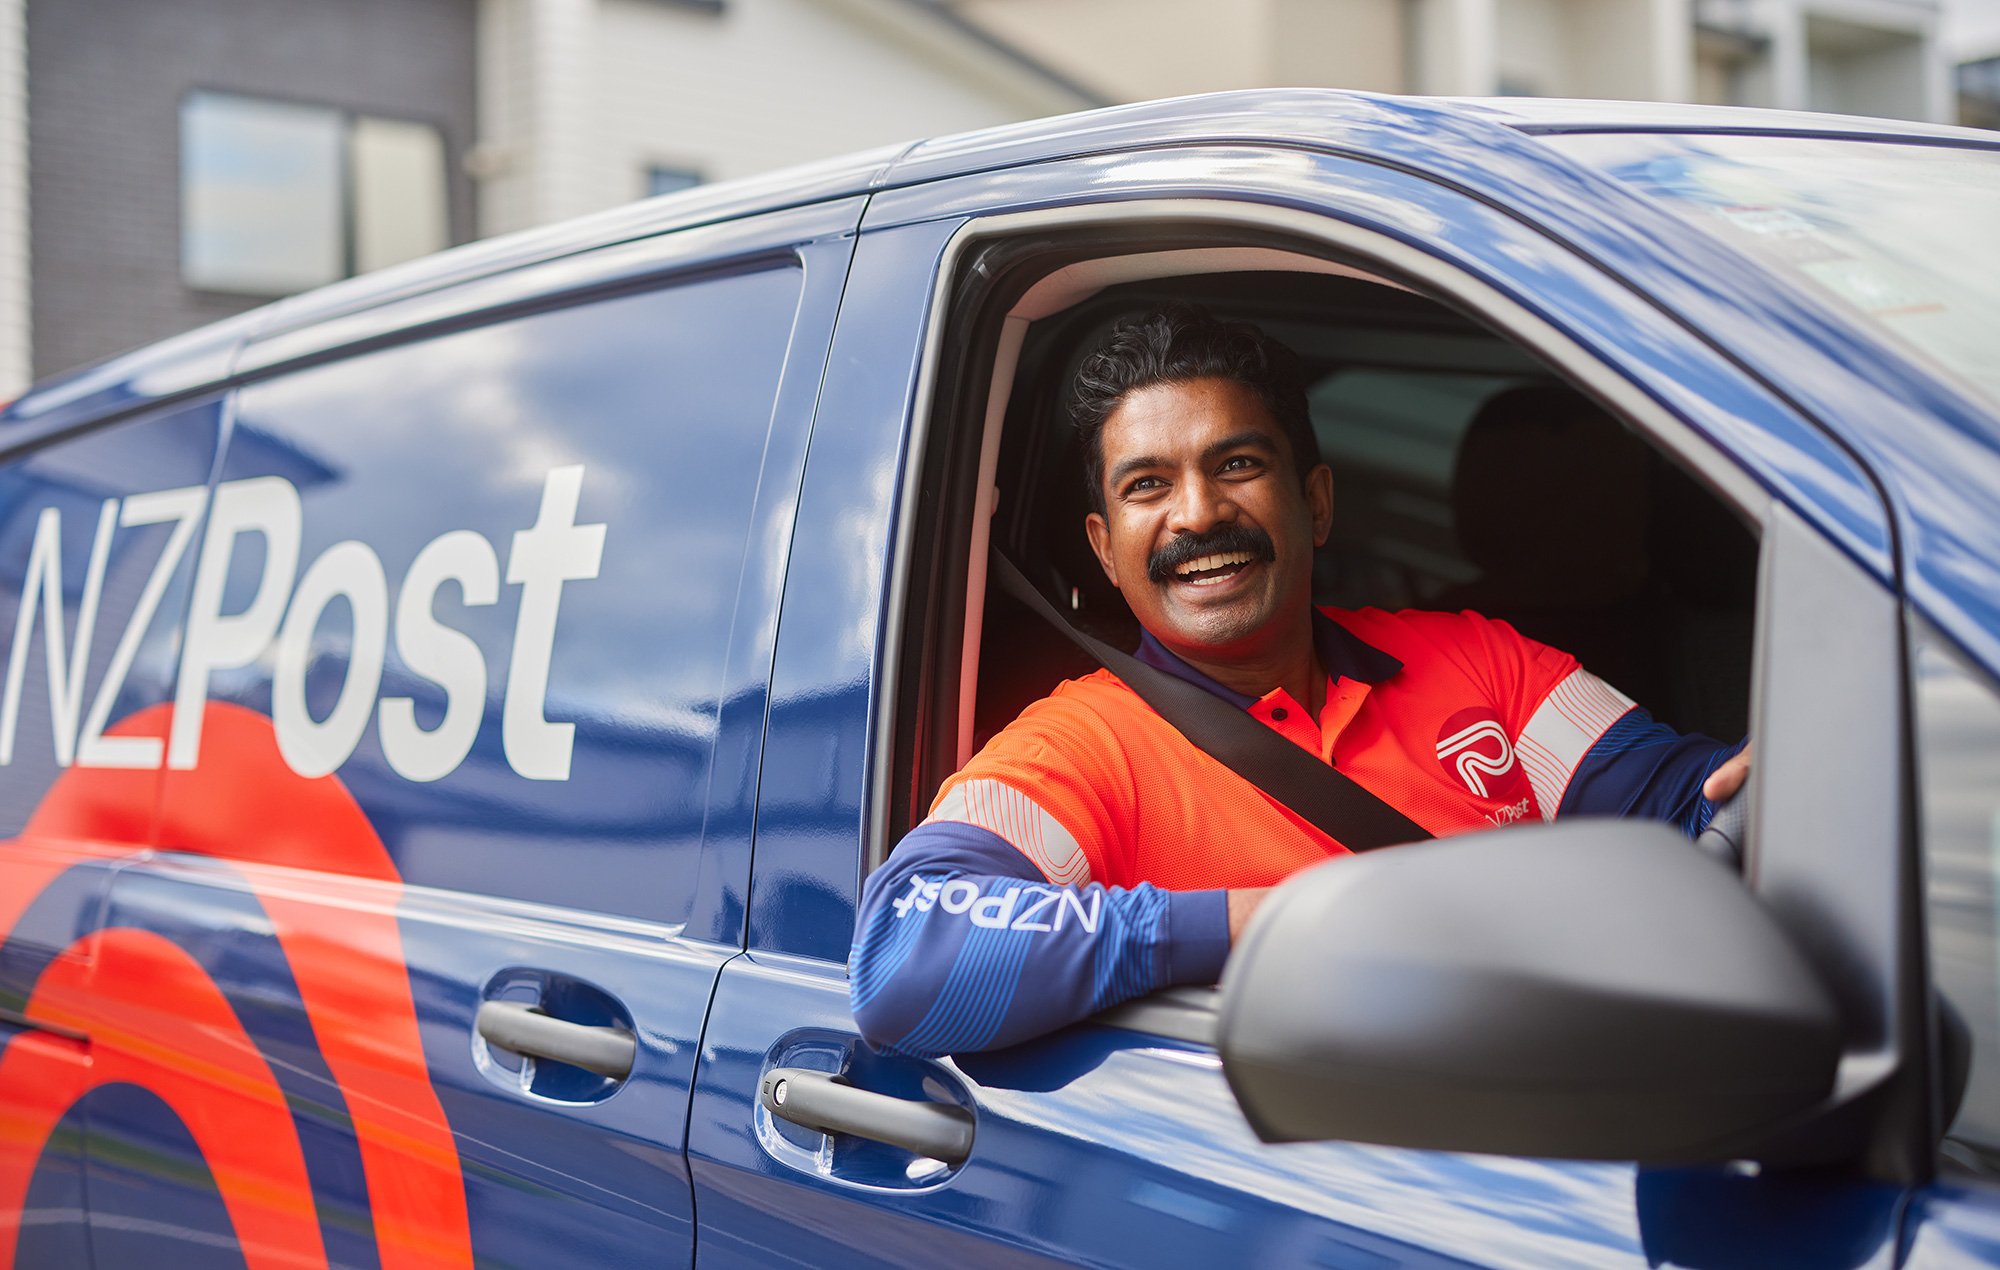 NZ-Post---Consumer-Delivery-September-2022-(Final-Selects)-67.jpg